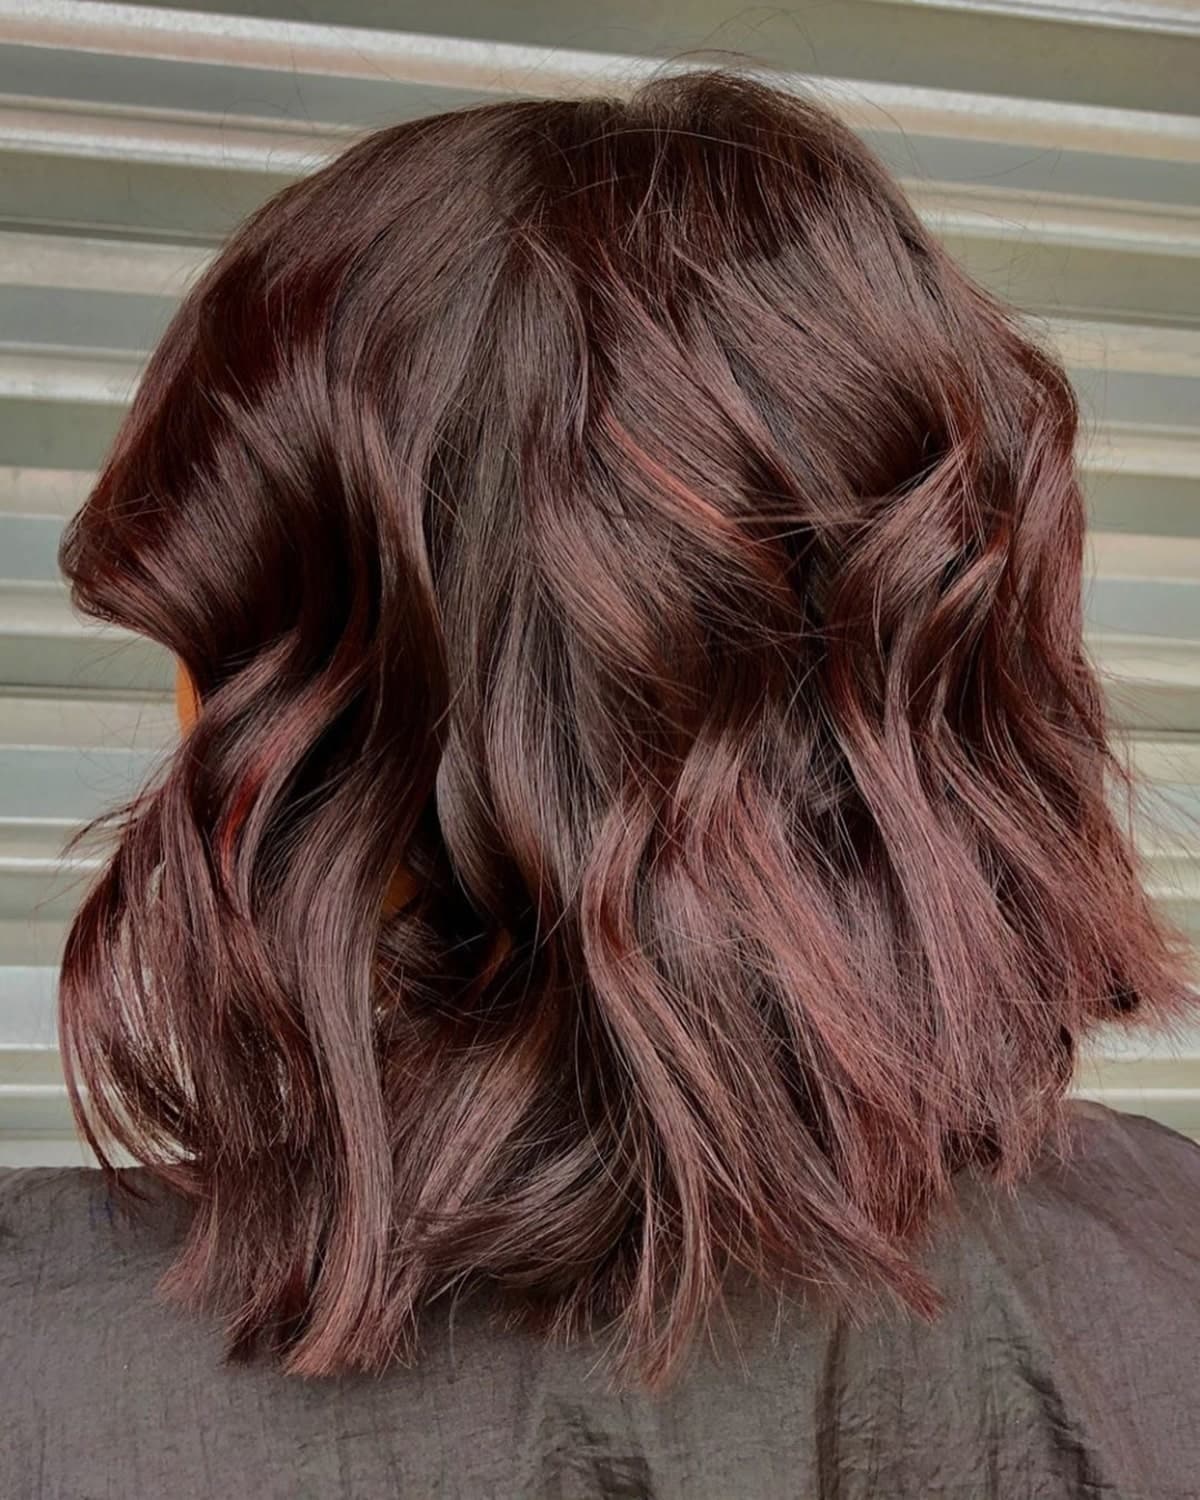 Rich Red Hair With Subtle Highlights